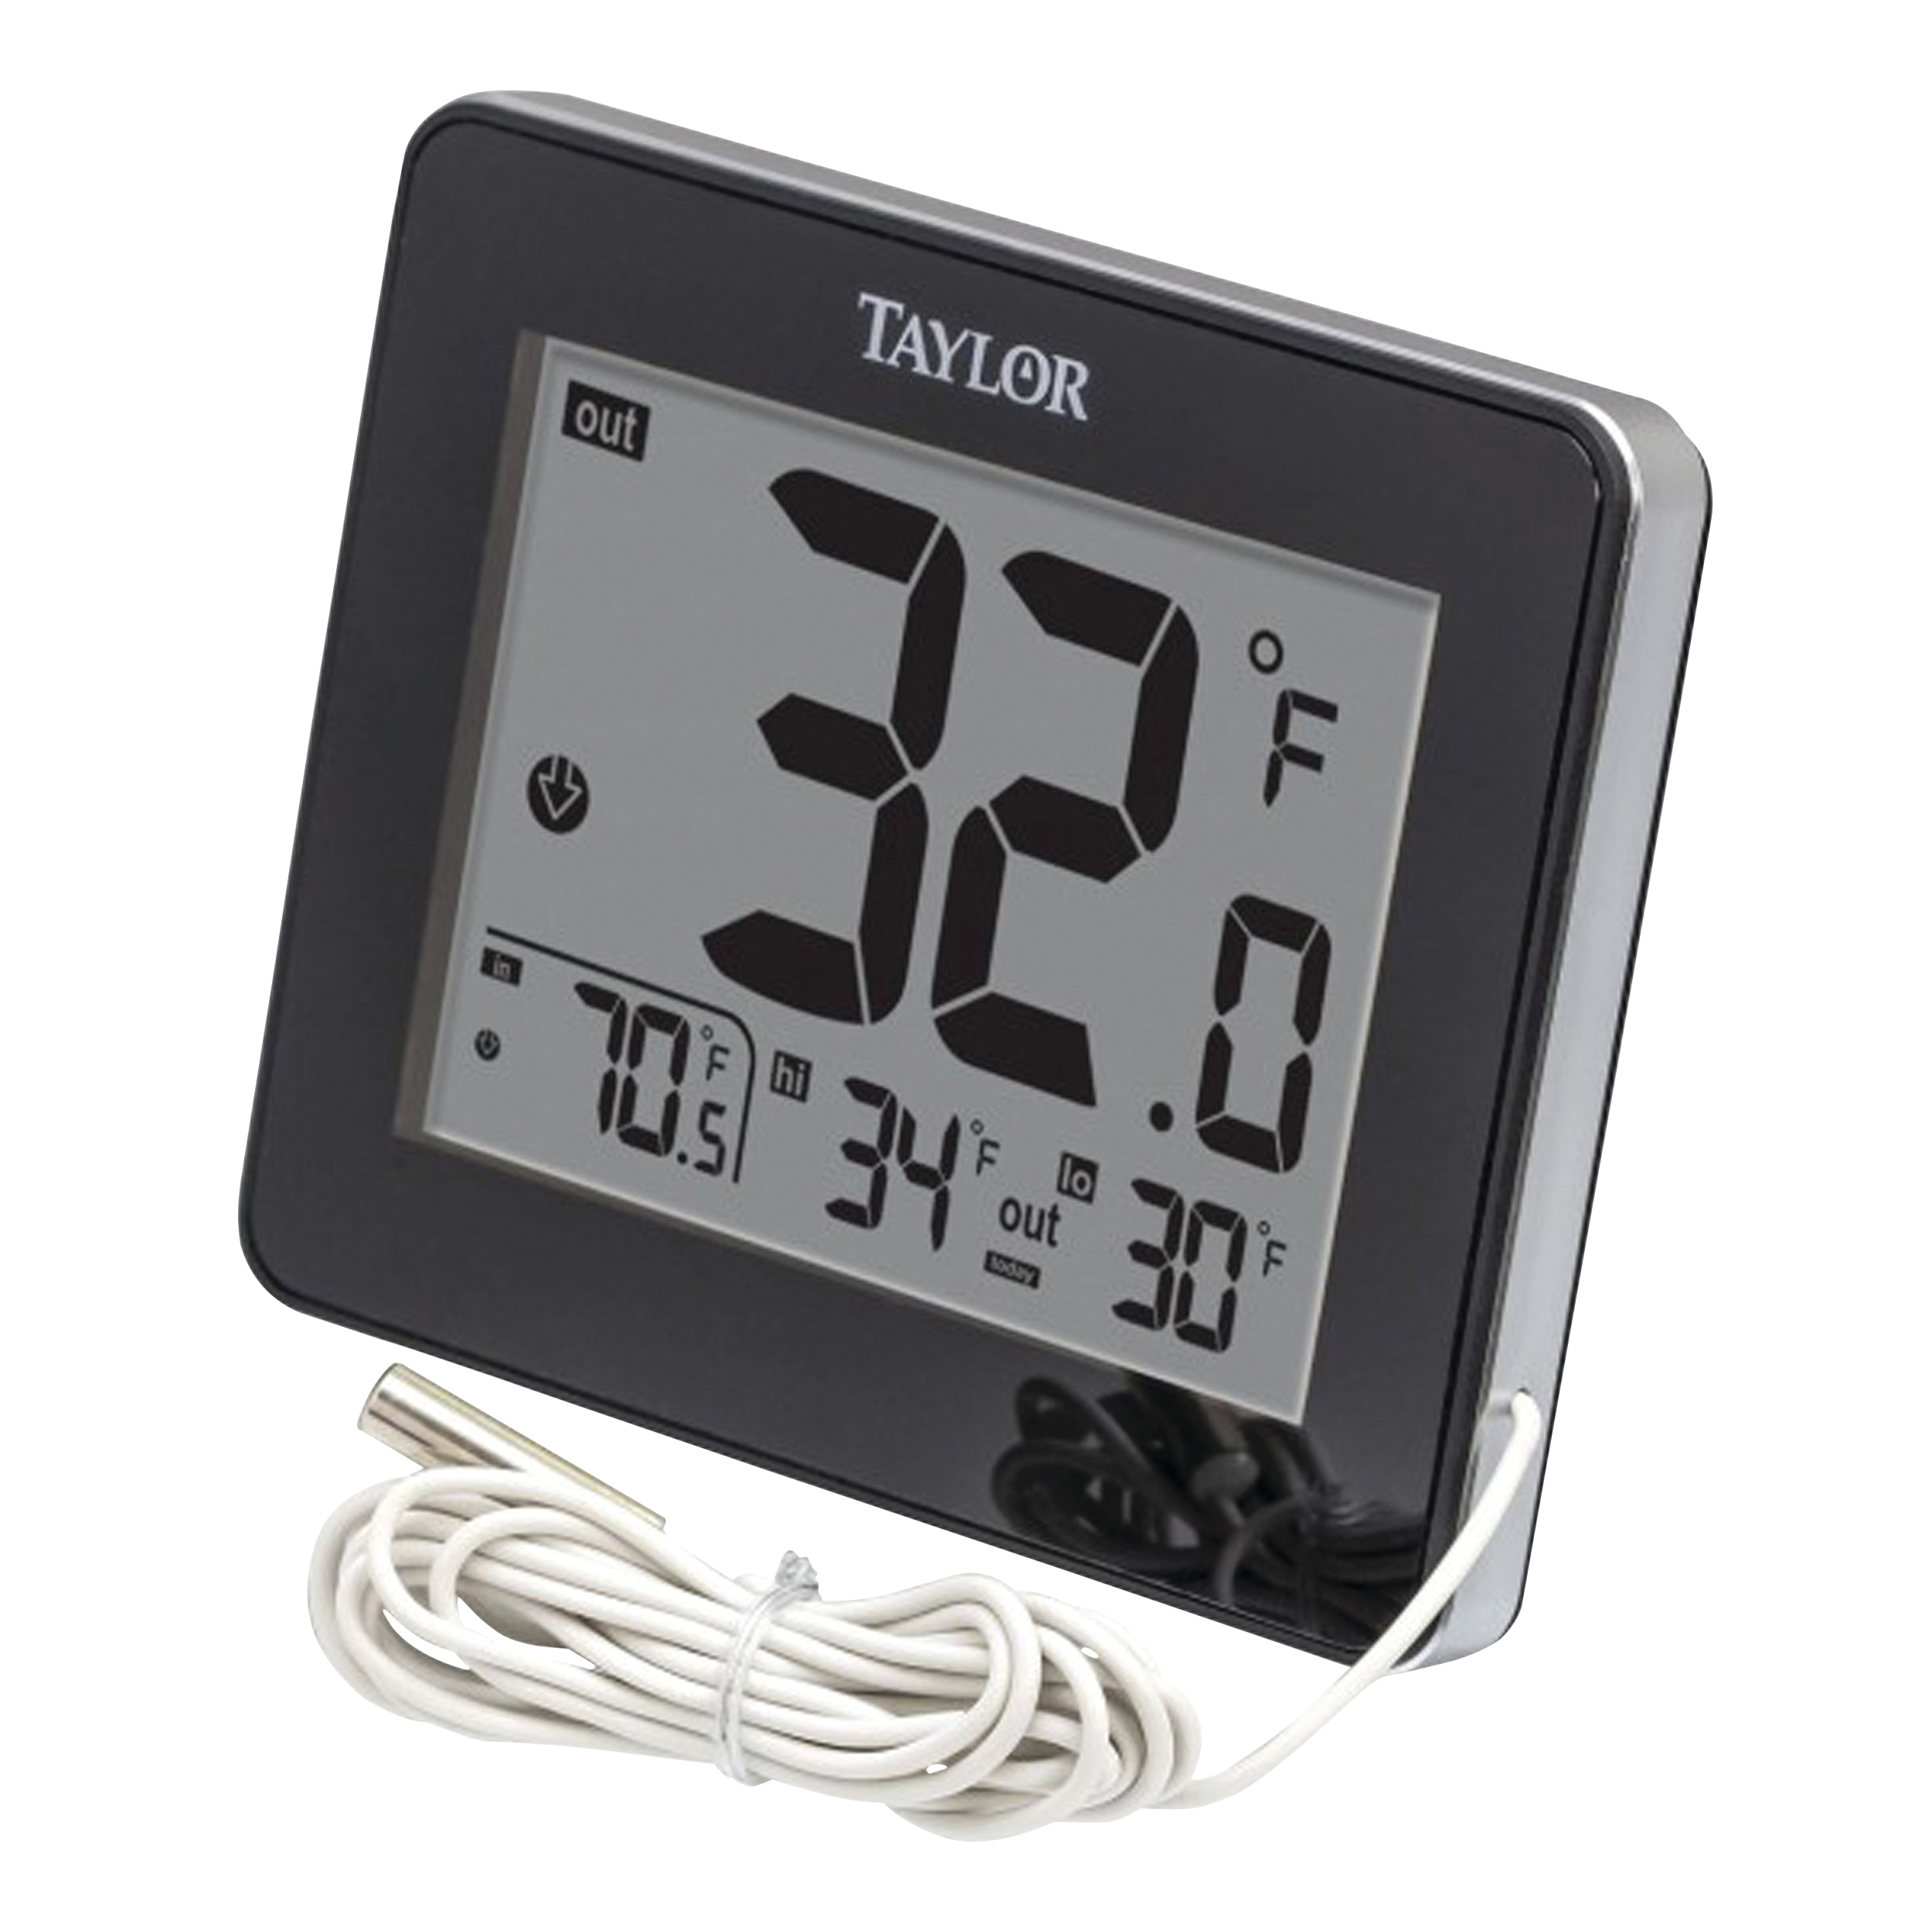 Taylor 1710 Thermometer, 2.94 in W x 2.13 in H Display, Plastic Casing - 1